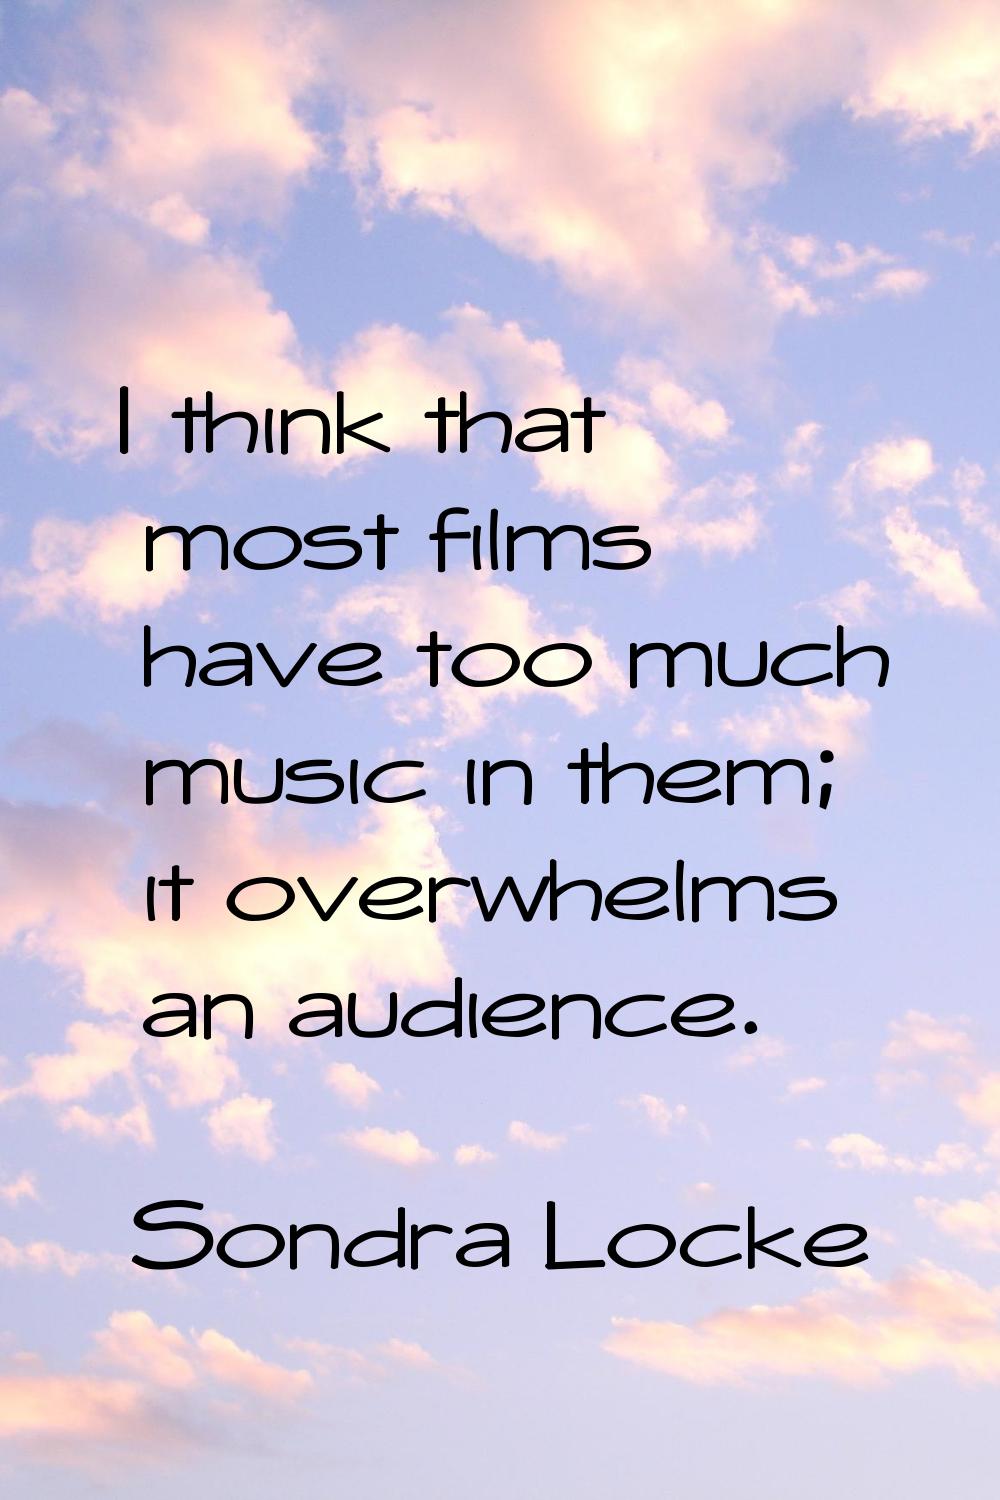 I think that most films have too much music in them; it overwhelms an audience.